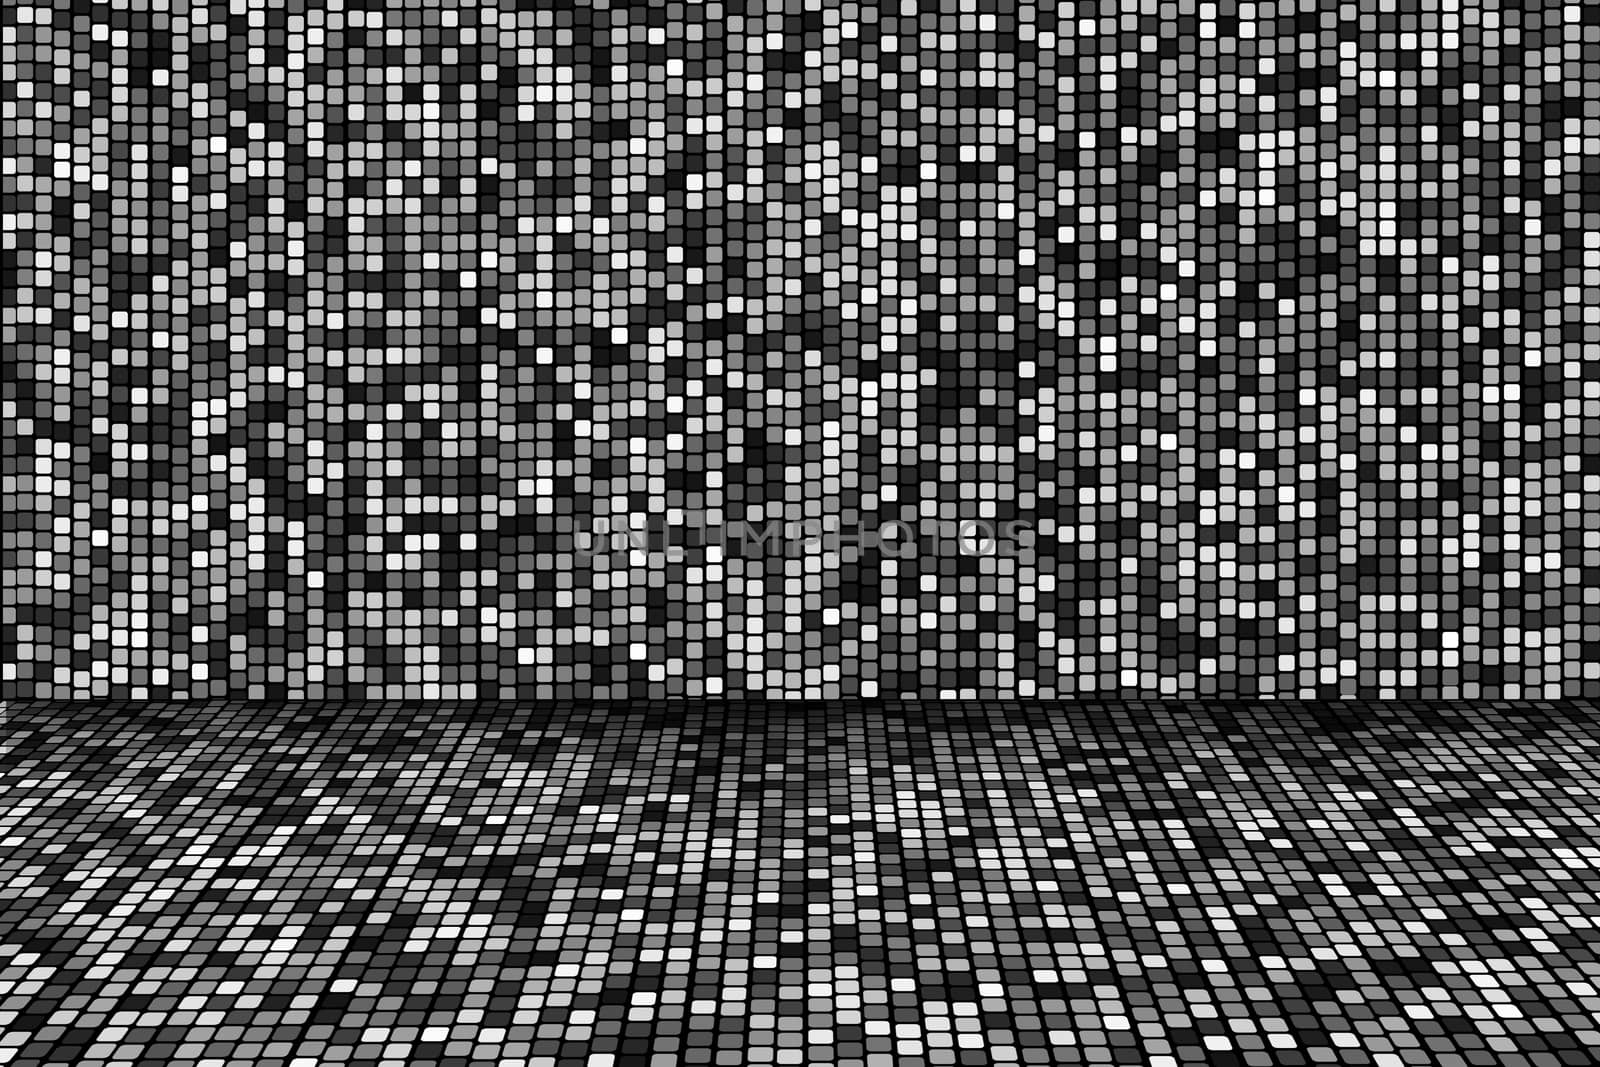 black and white square dots stage background, perspective.